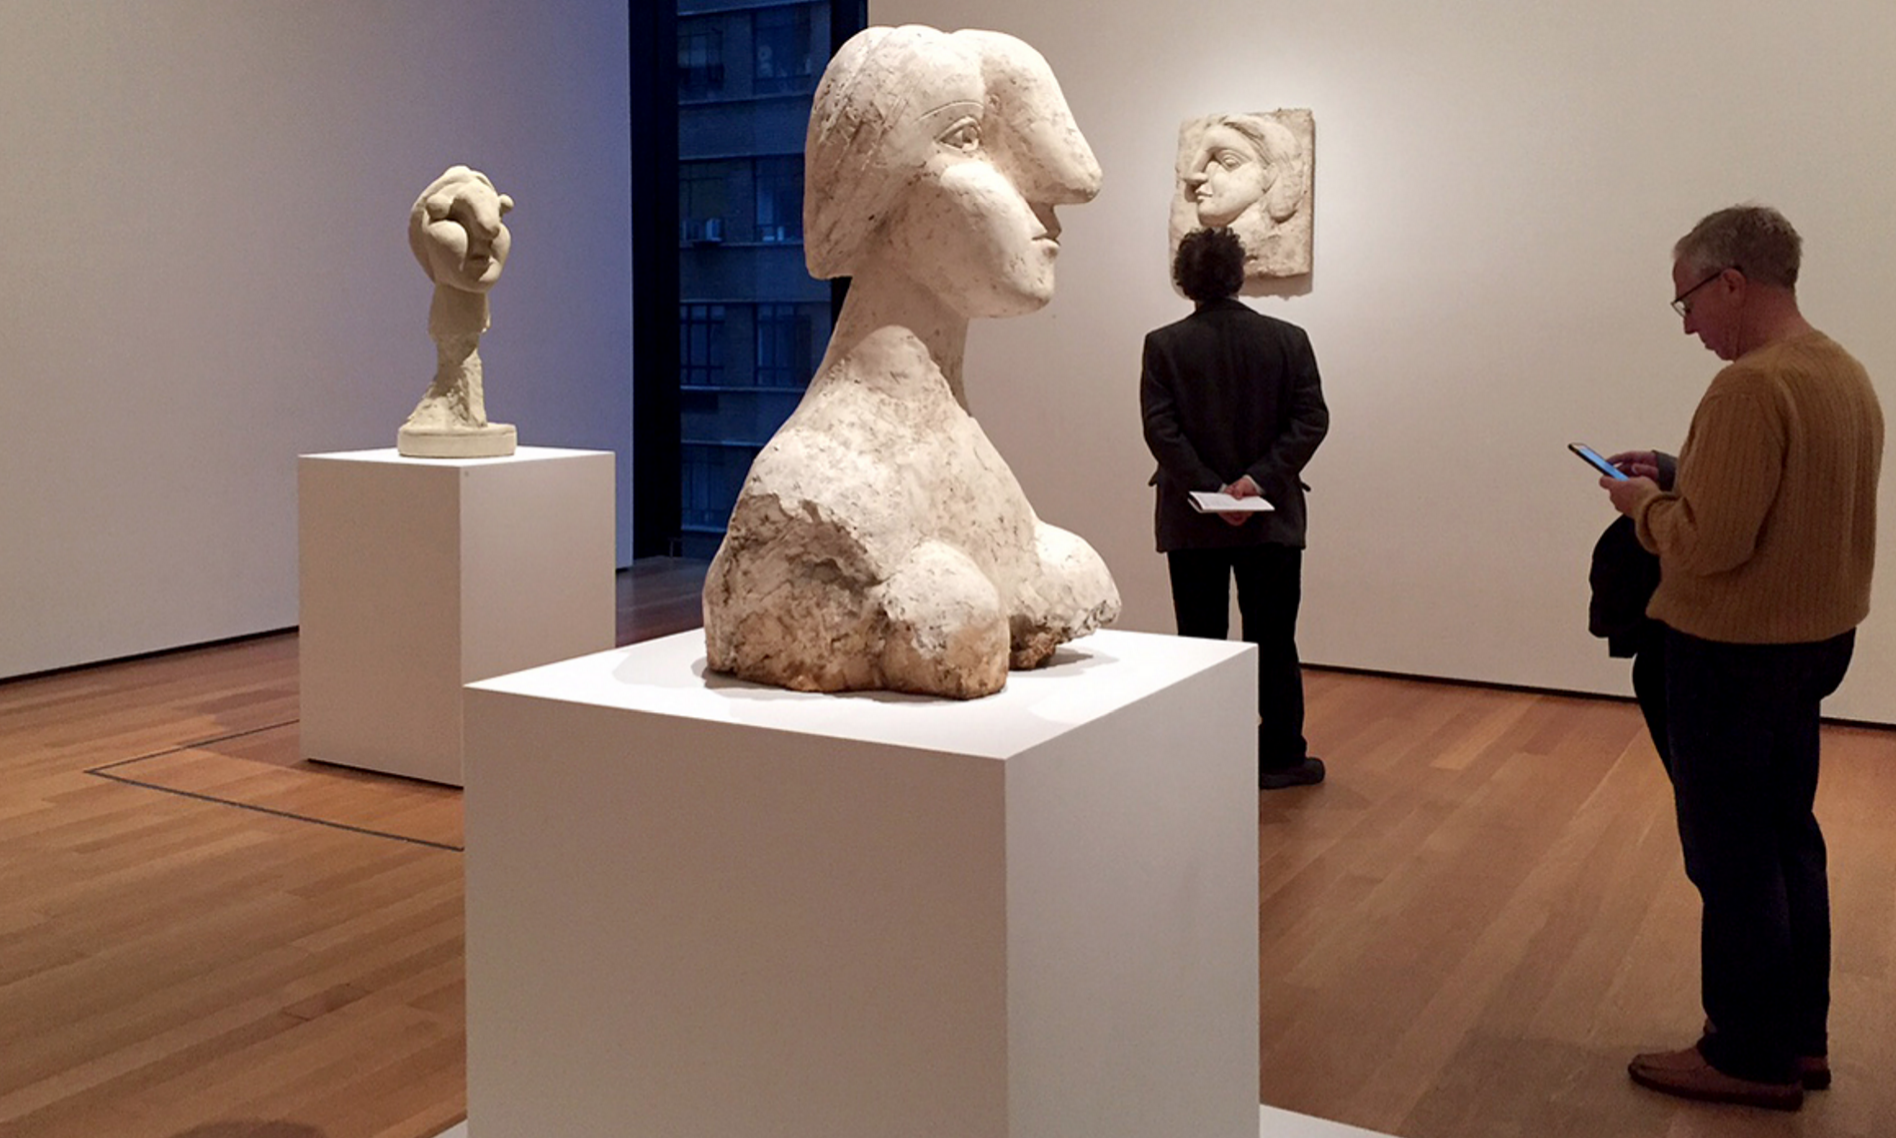 picasso's sought after bust of a woman appears to have two owners